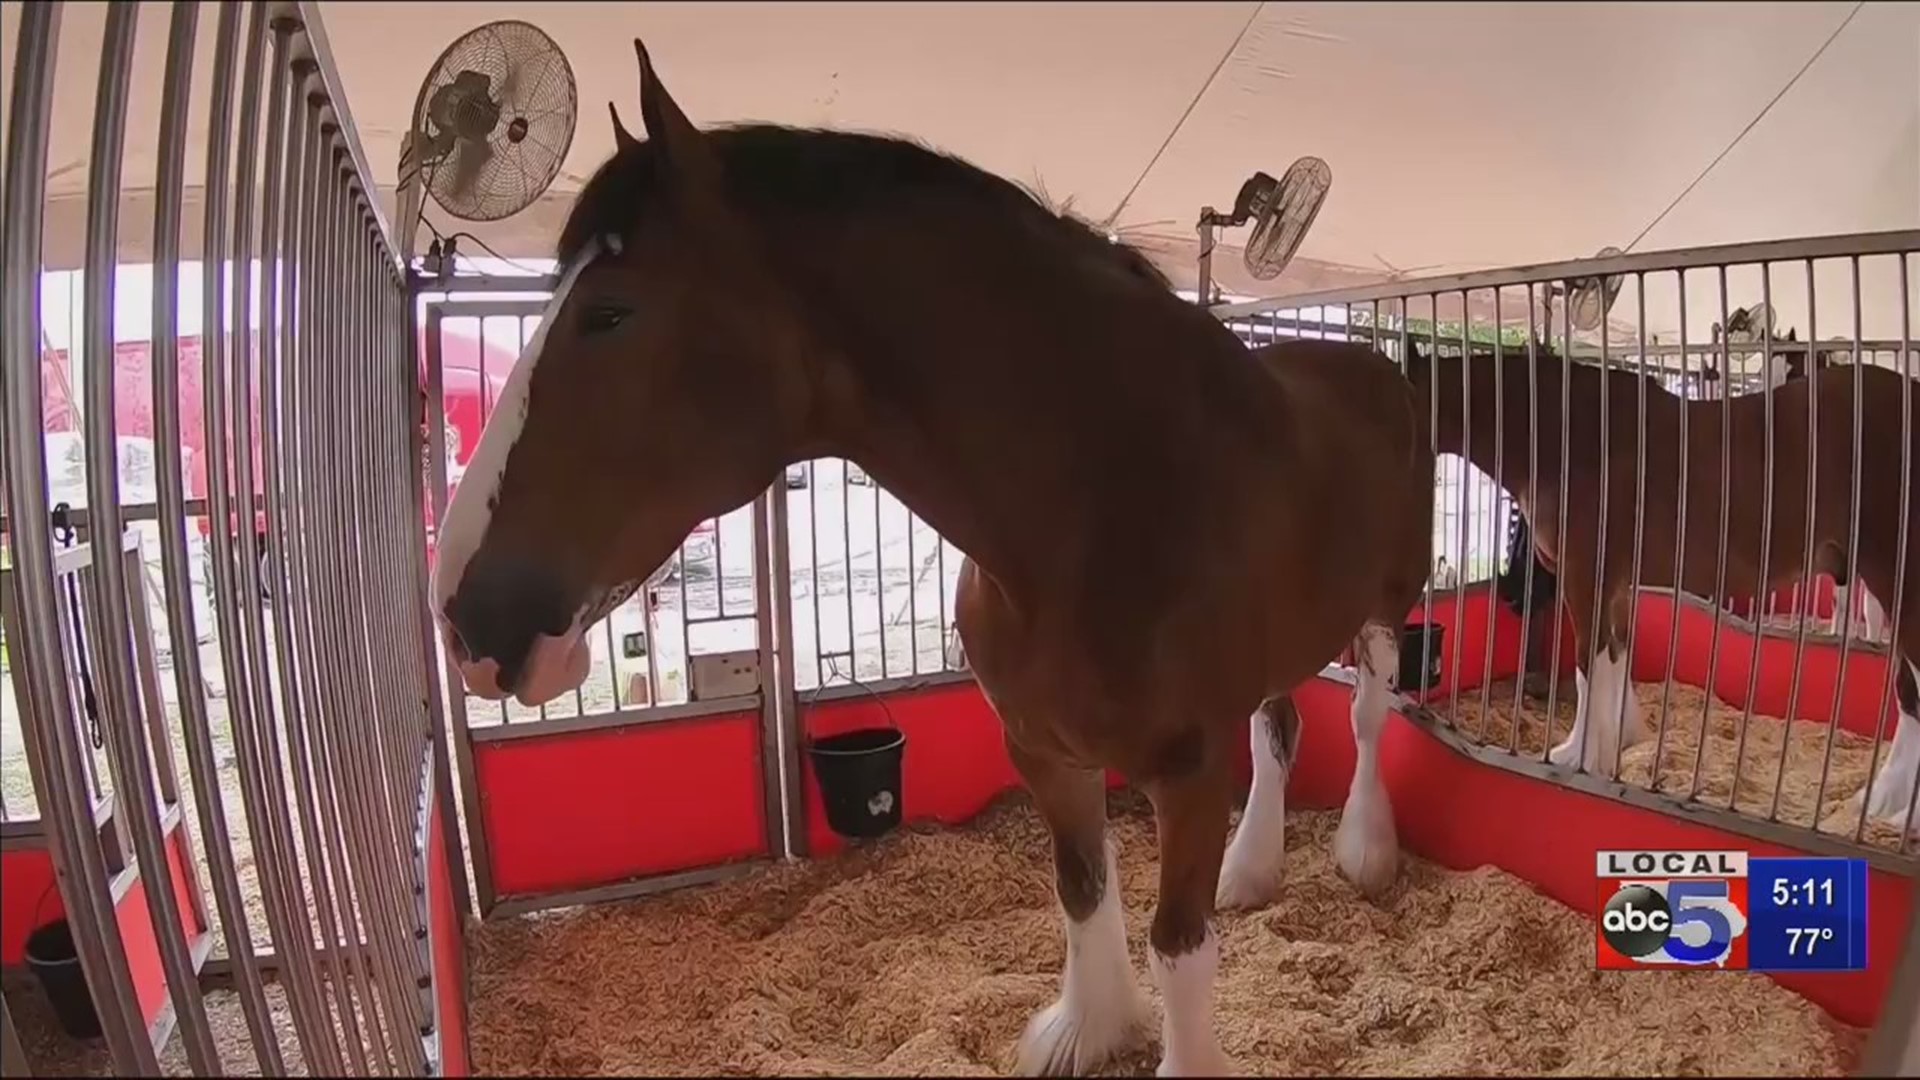 Budweiser Clydesdale's and Pie Eating Contest at Iowa State Fair